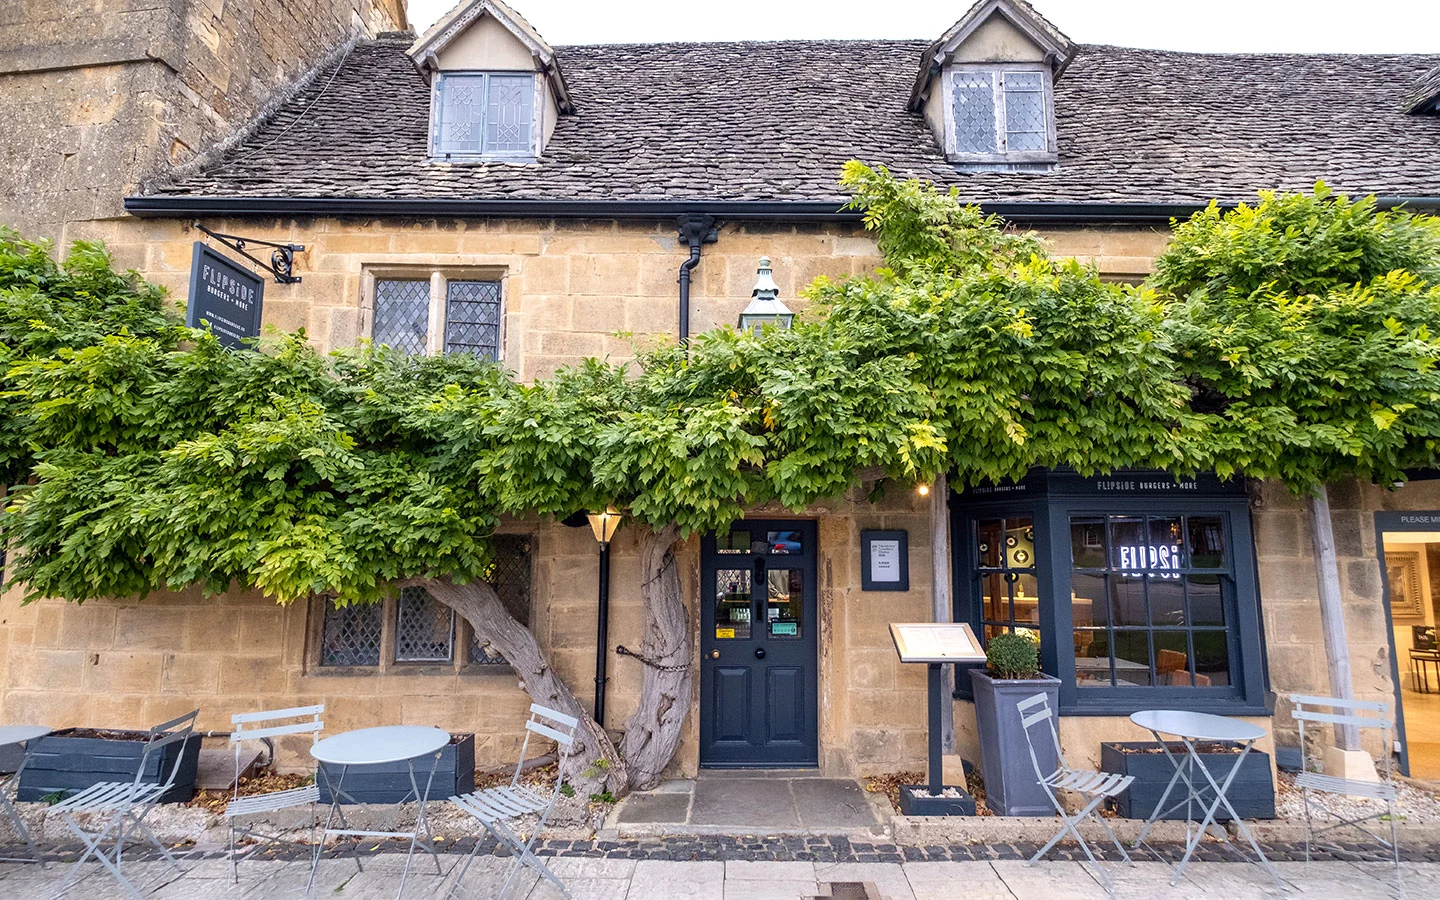 Restaurant on Broadway's High Street in the Cotswolds